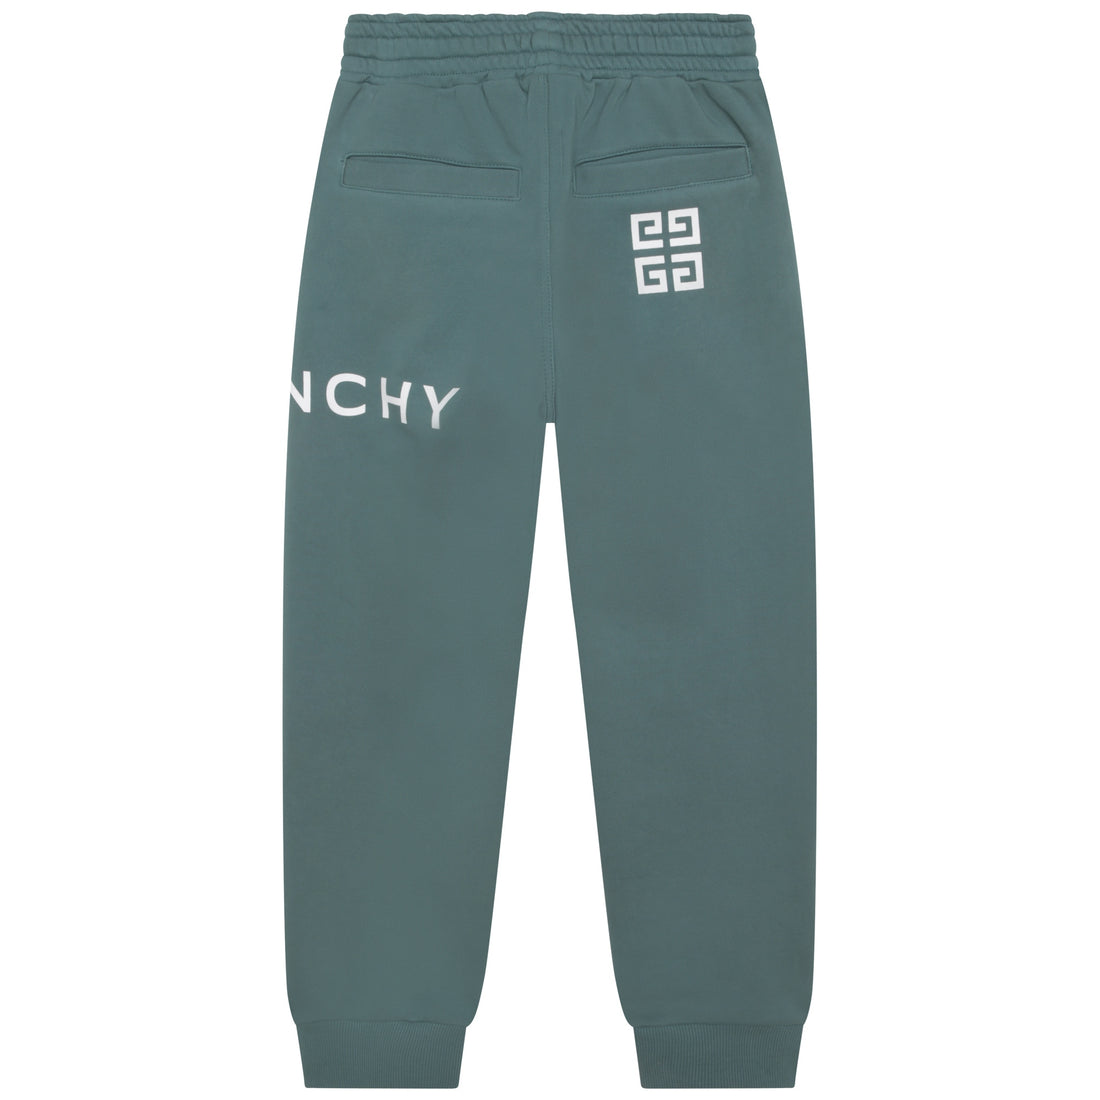 Givenchy Jogging Bottoms Style: H24231